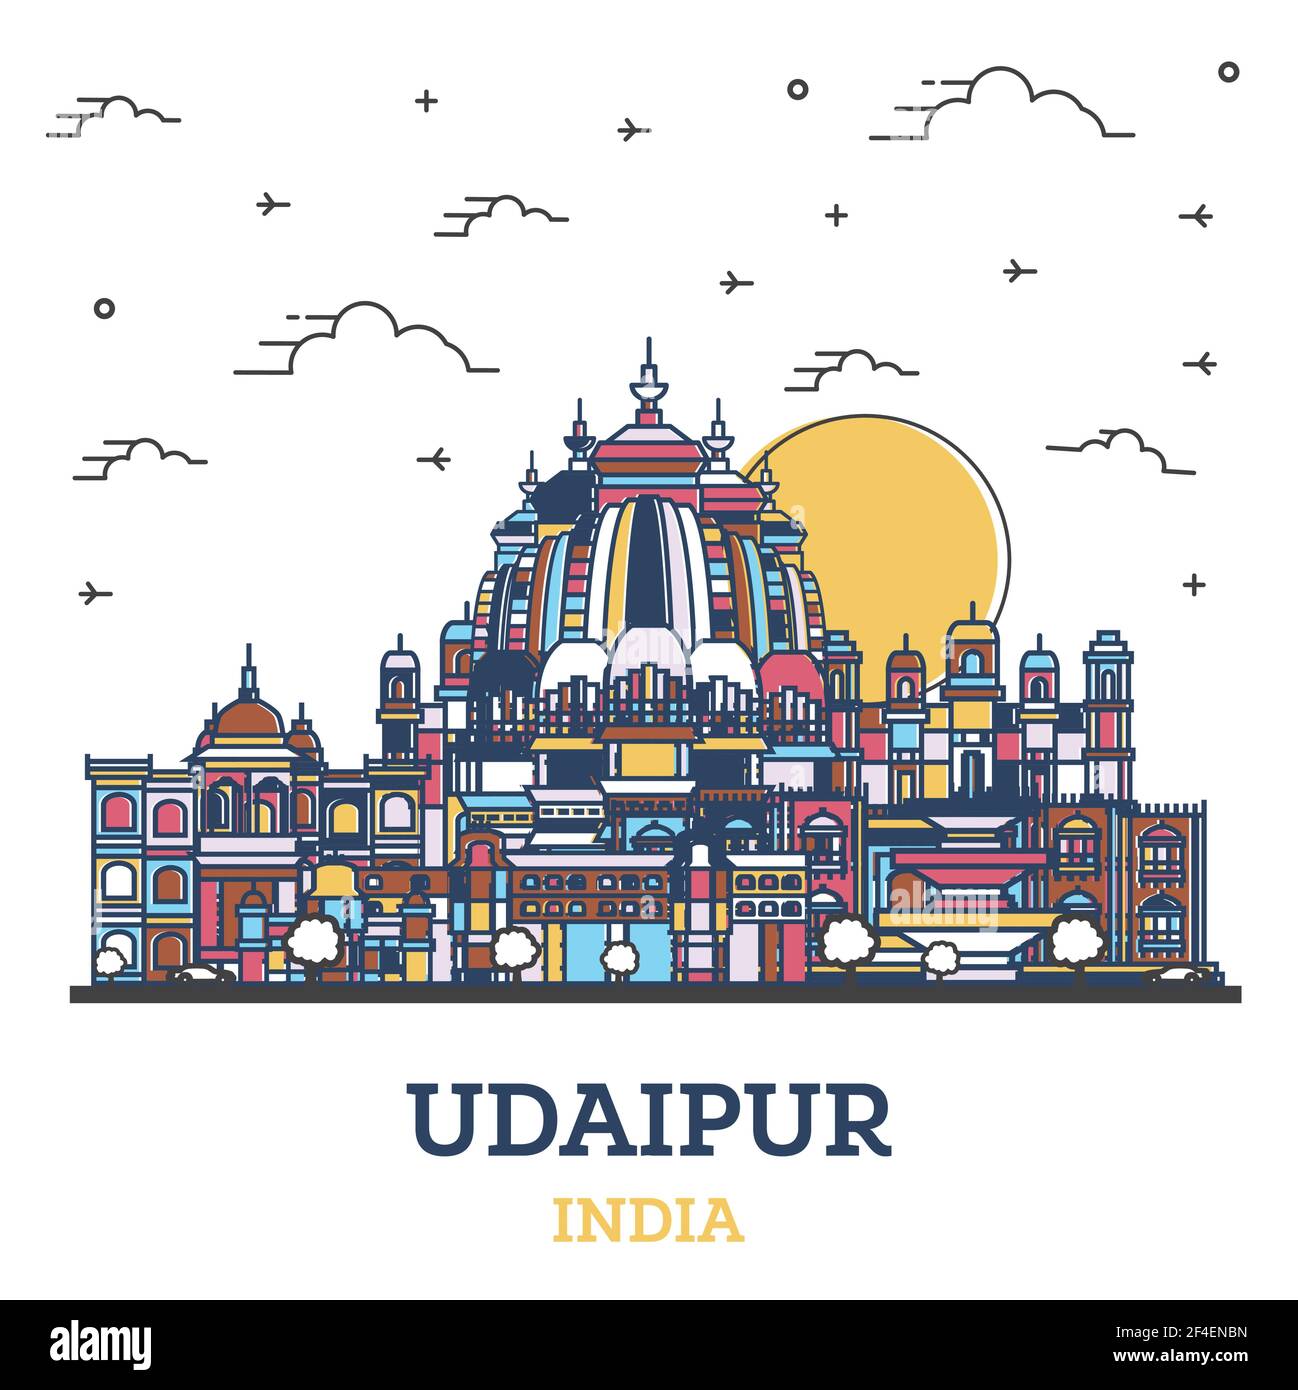 Details more than 169 udaipur sketch latest